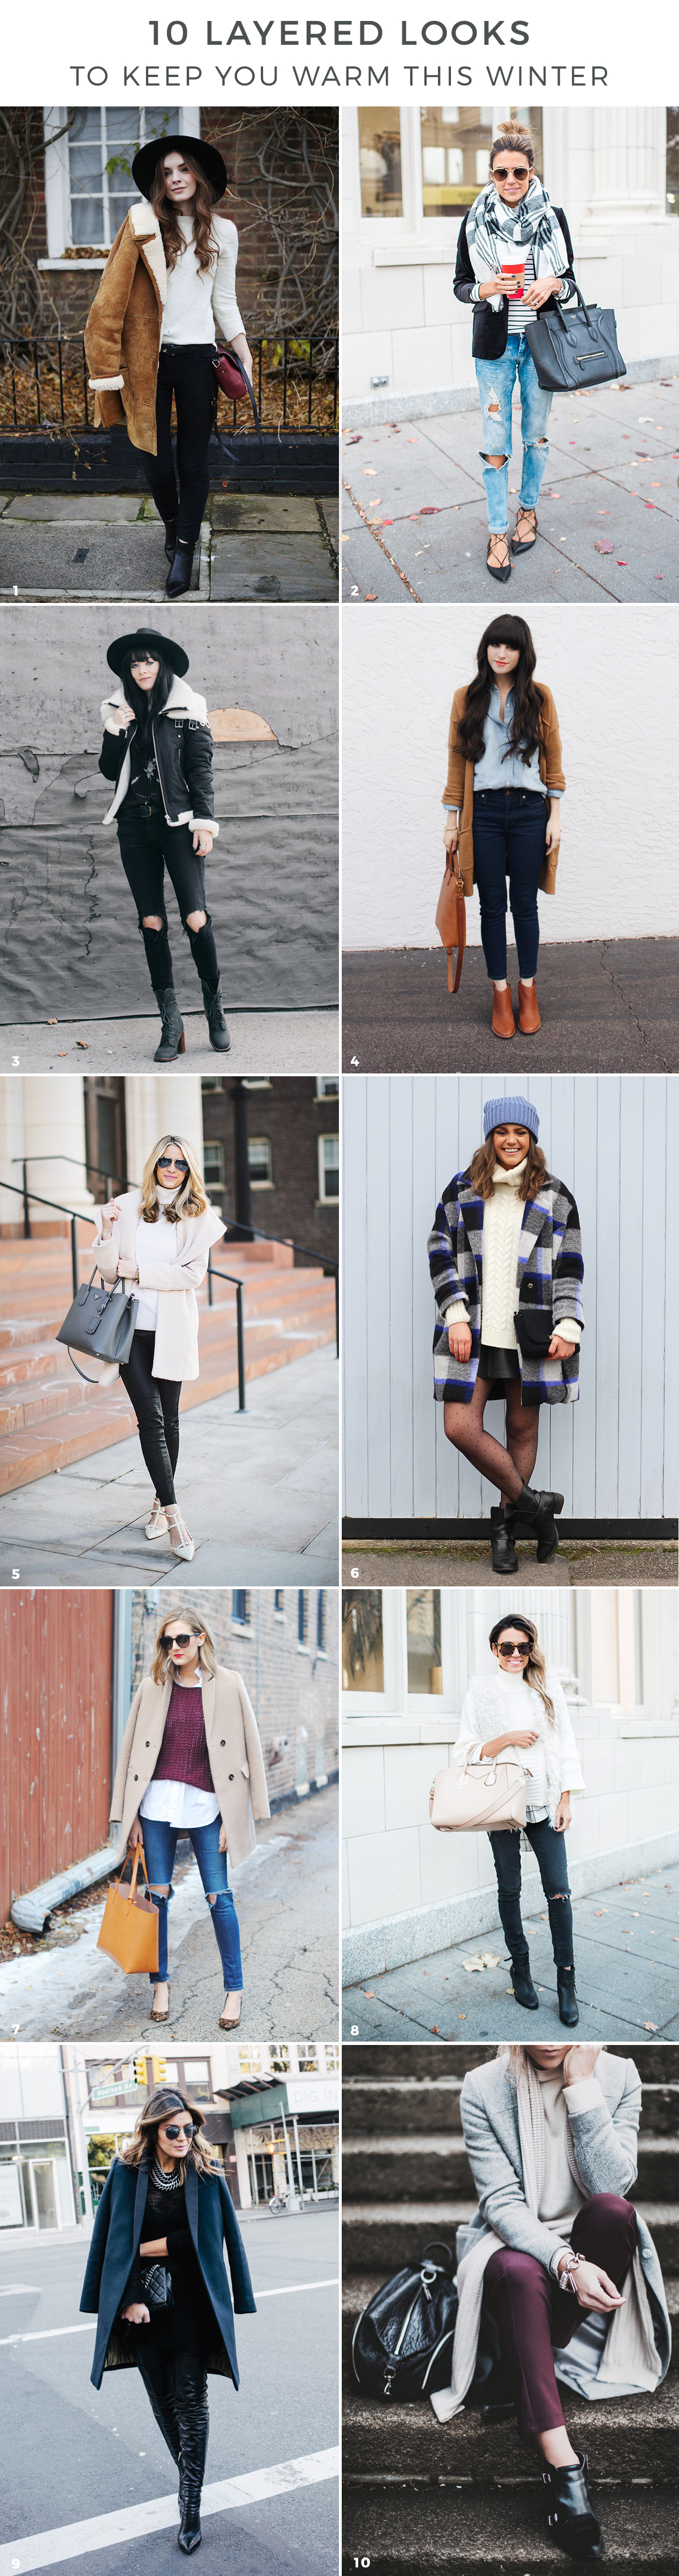 winter outfits, winter outfit ideas, layered looks, coats and jackets, roundup via Advicefroma20Something.com